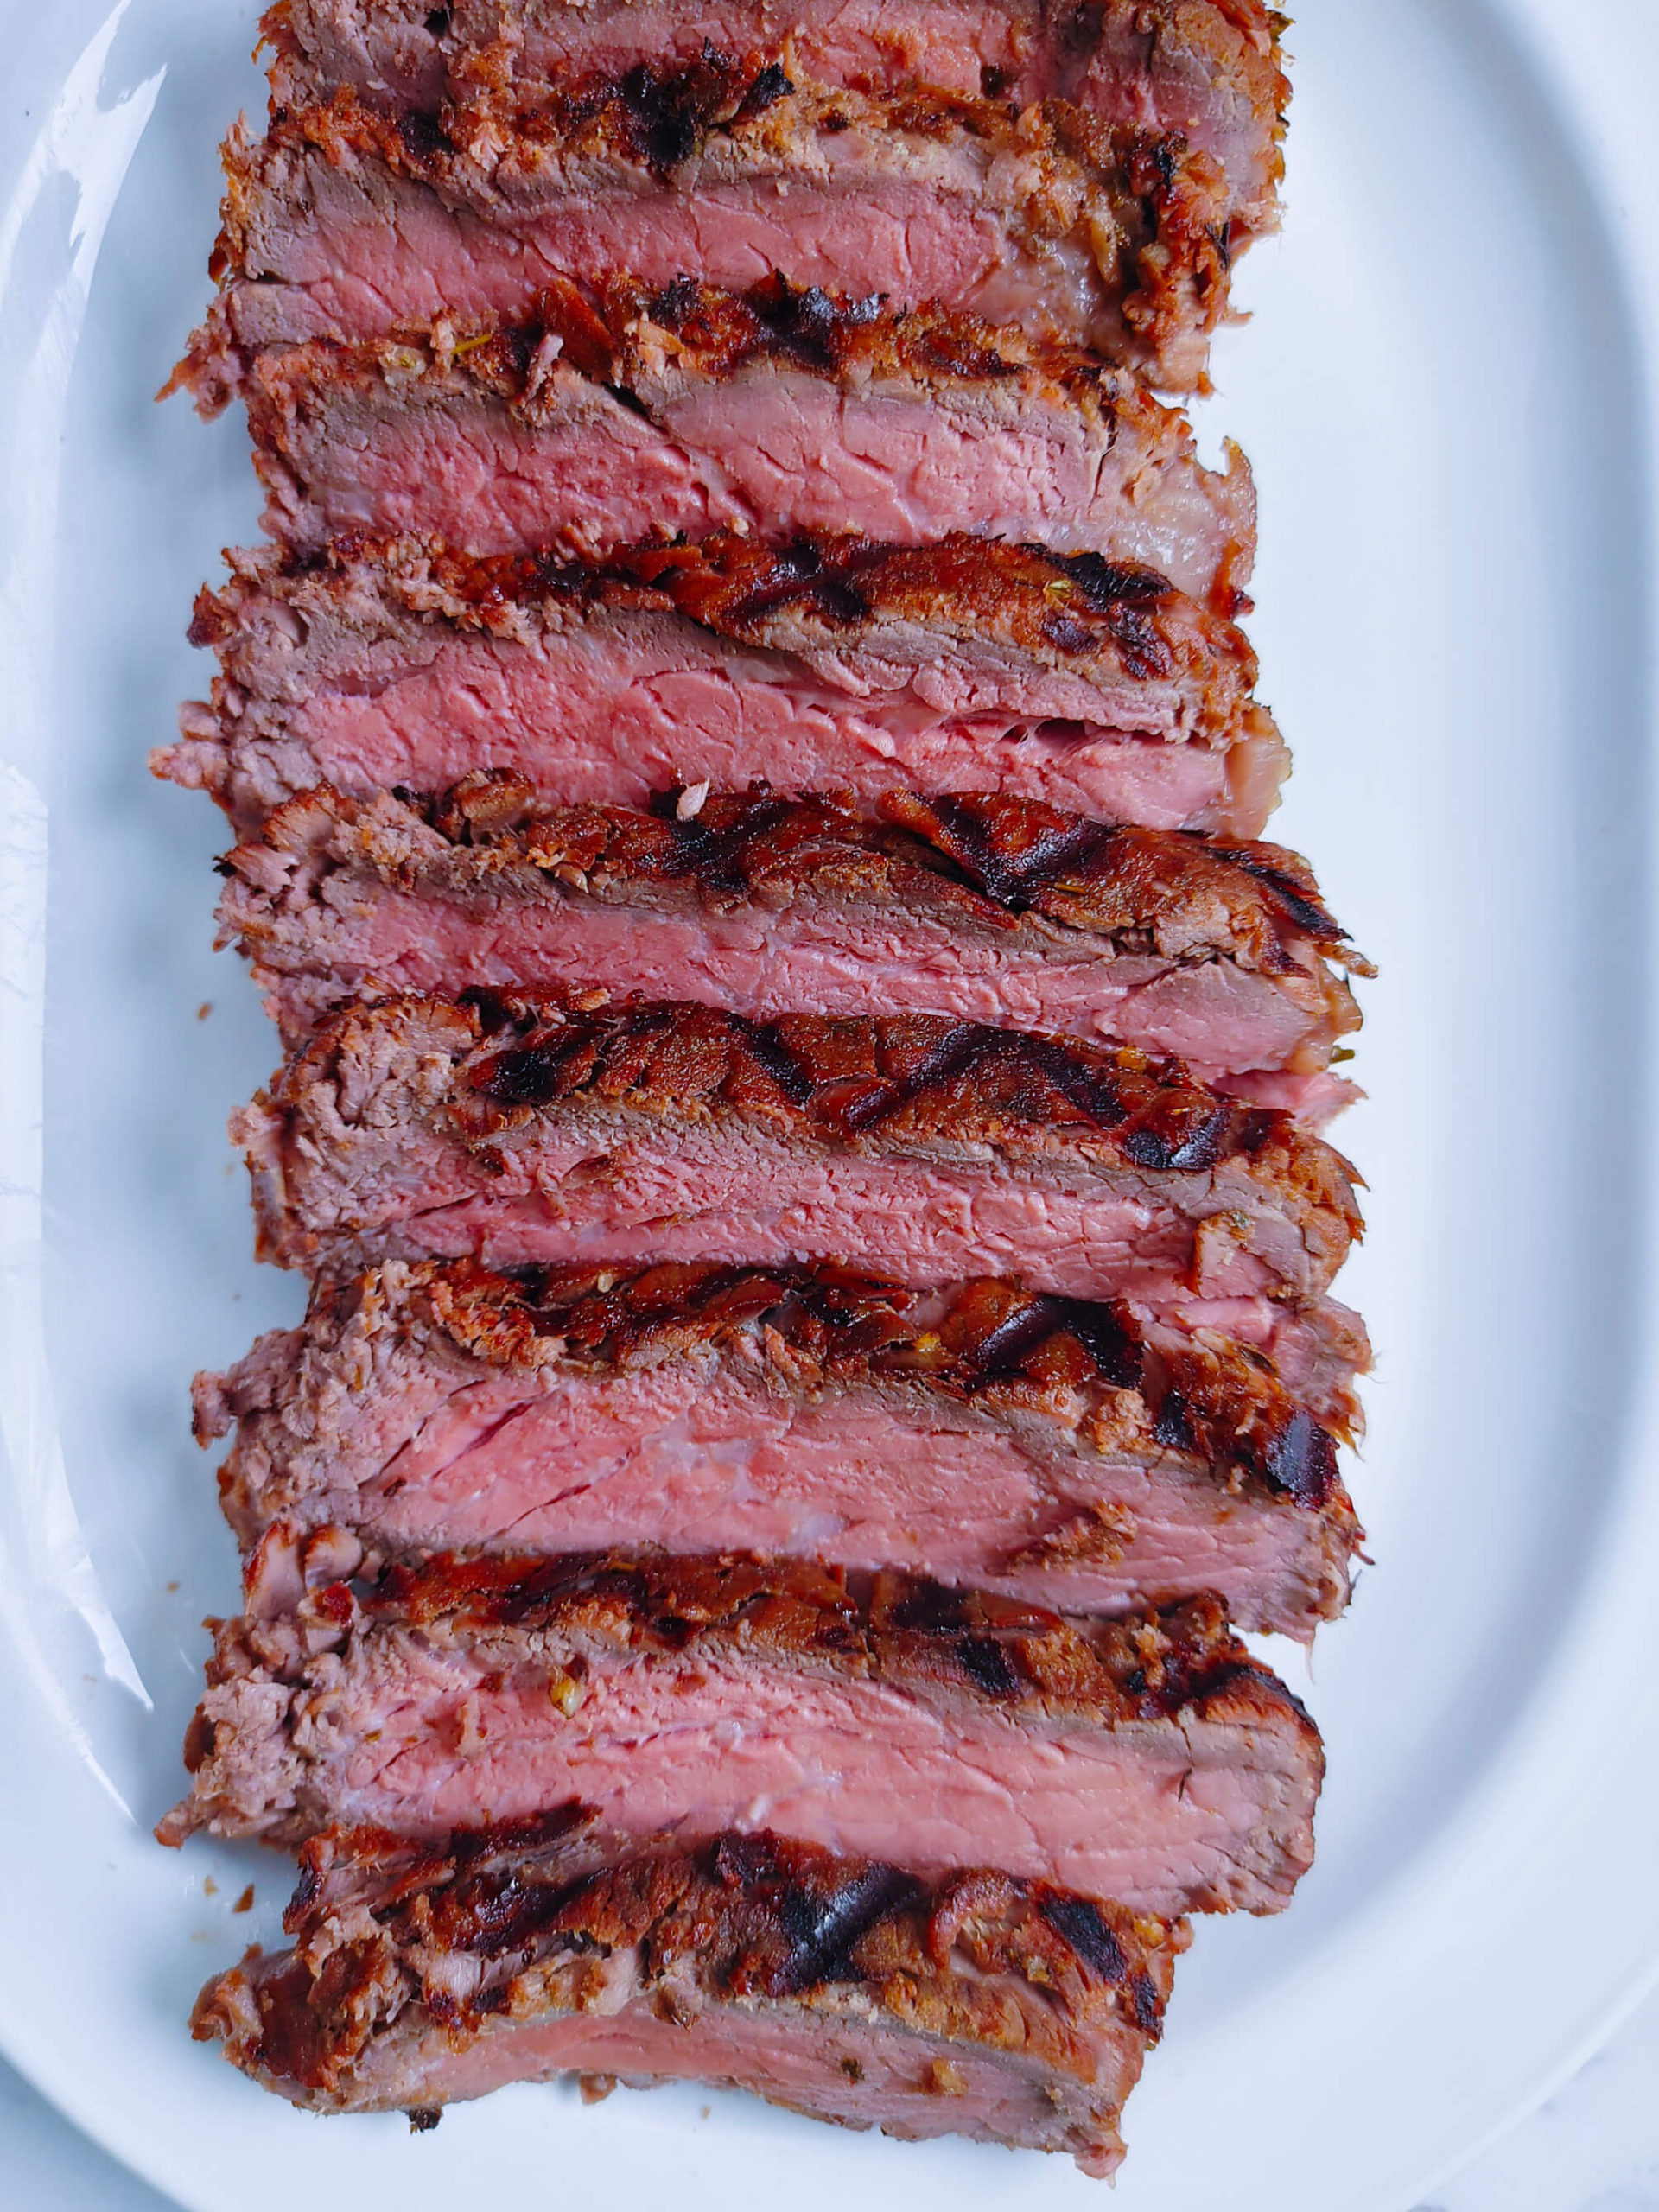 SLICE UP THE LONDON BROIL AGAINST THE GRAIN